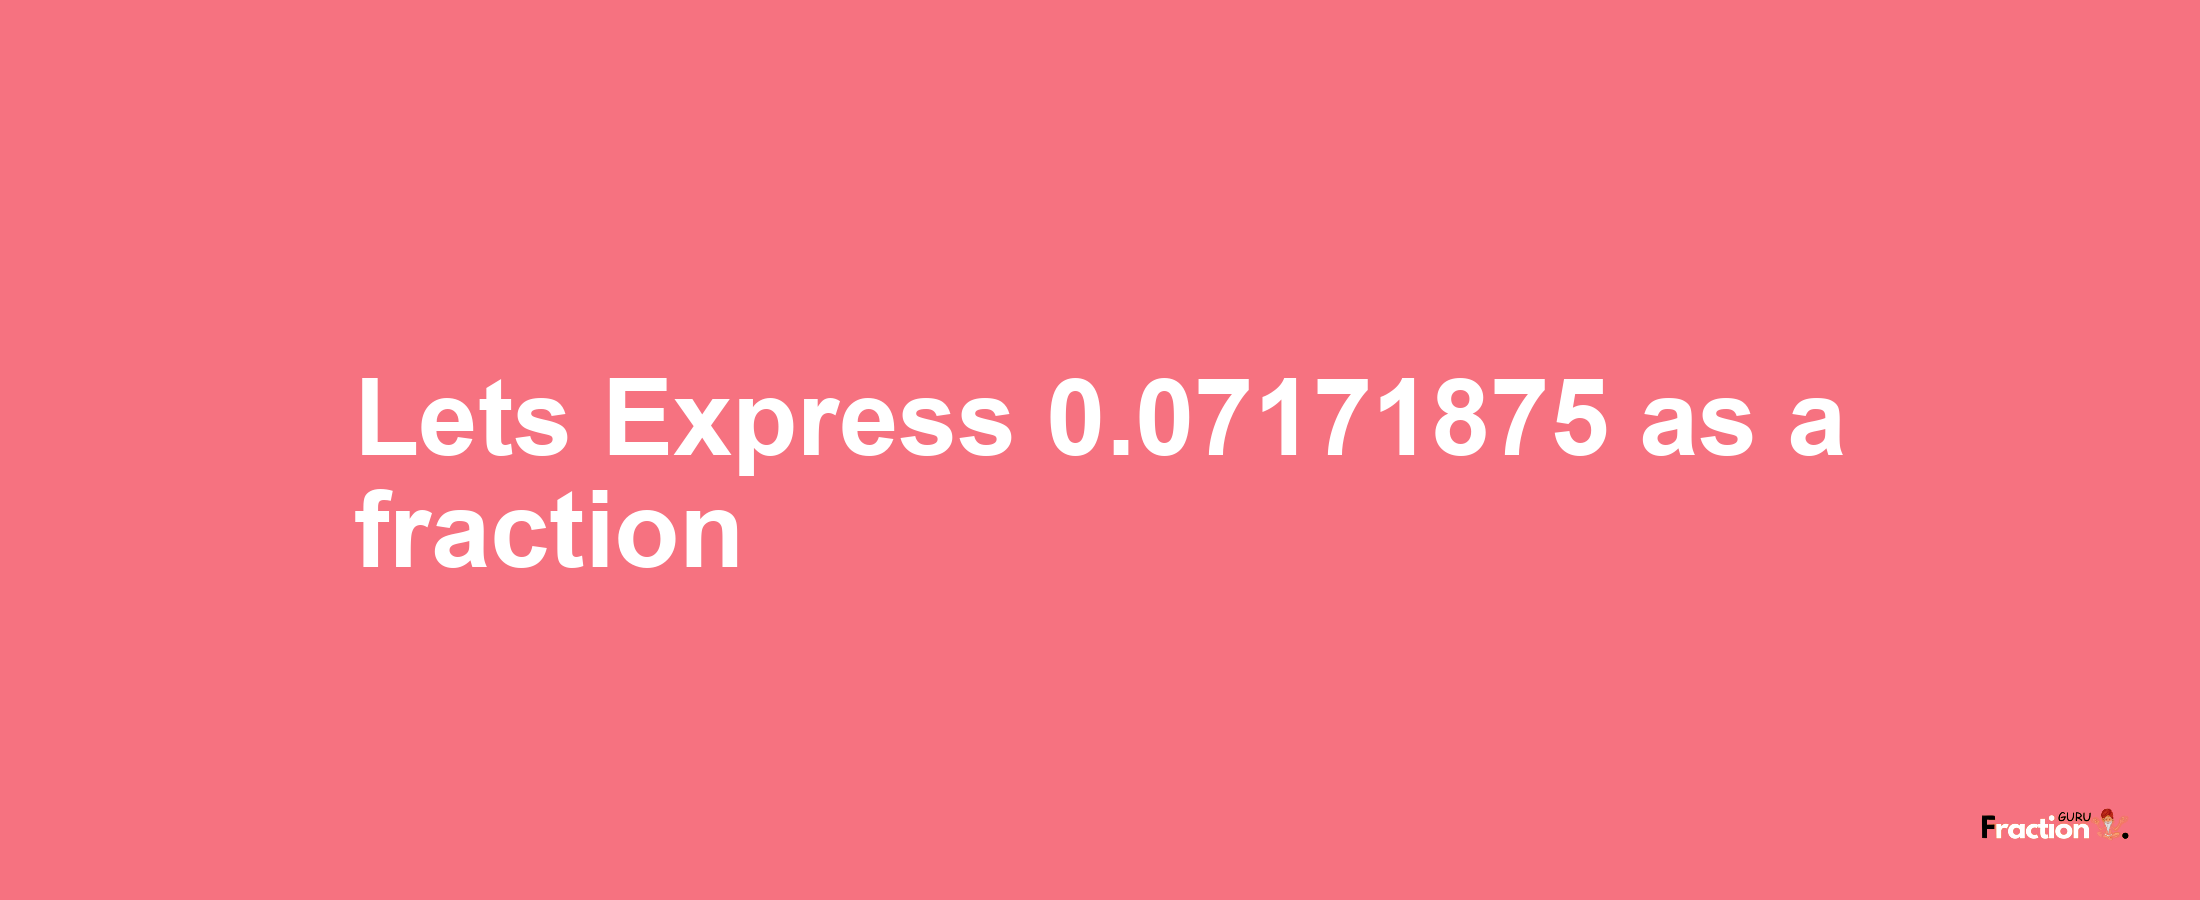 Lets Express 0.07171875 as afraction